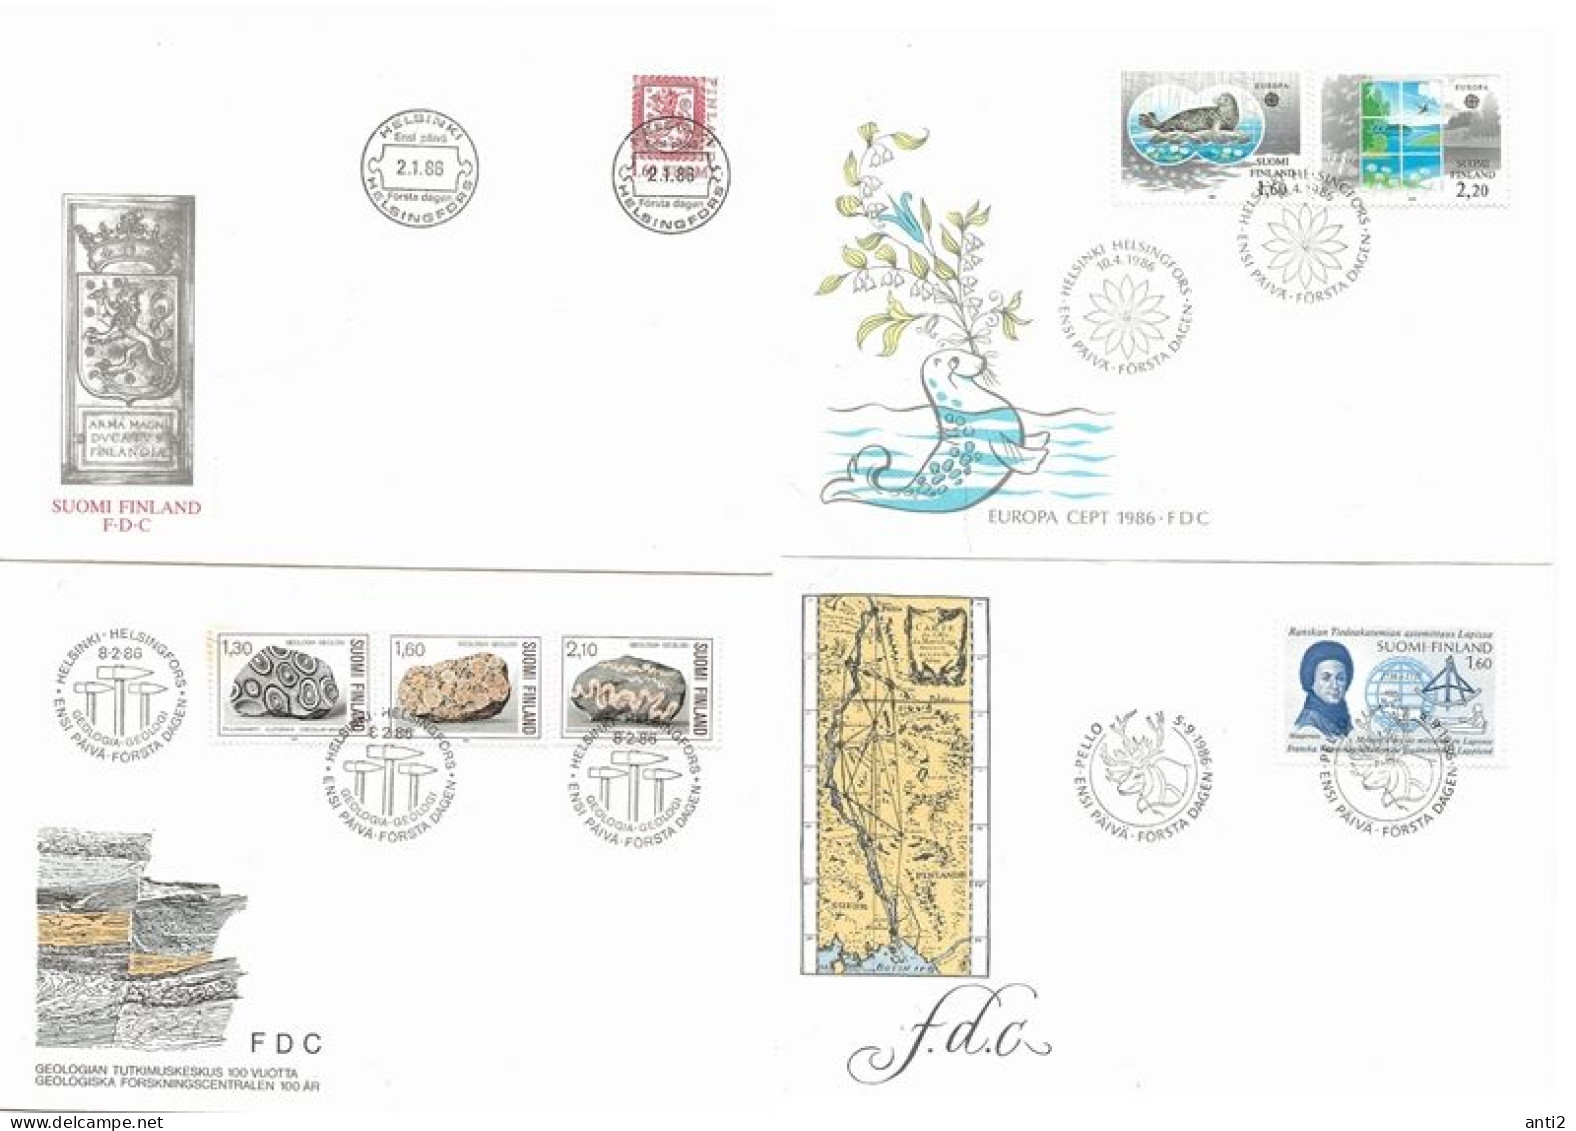 Finland   1986 8 FDC Issued 1986  - Stamps, Booklet, Bloc  -  981-992, Bloc 2, 1002-1004   FDCs - Storia Postale